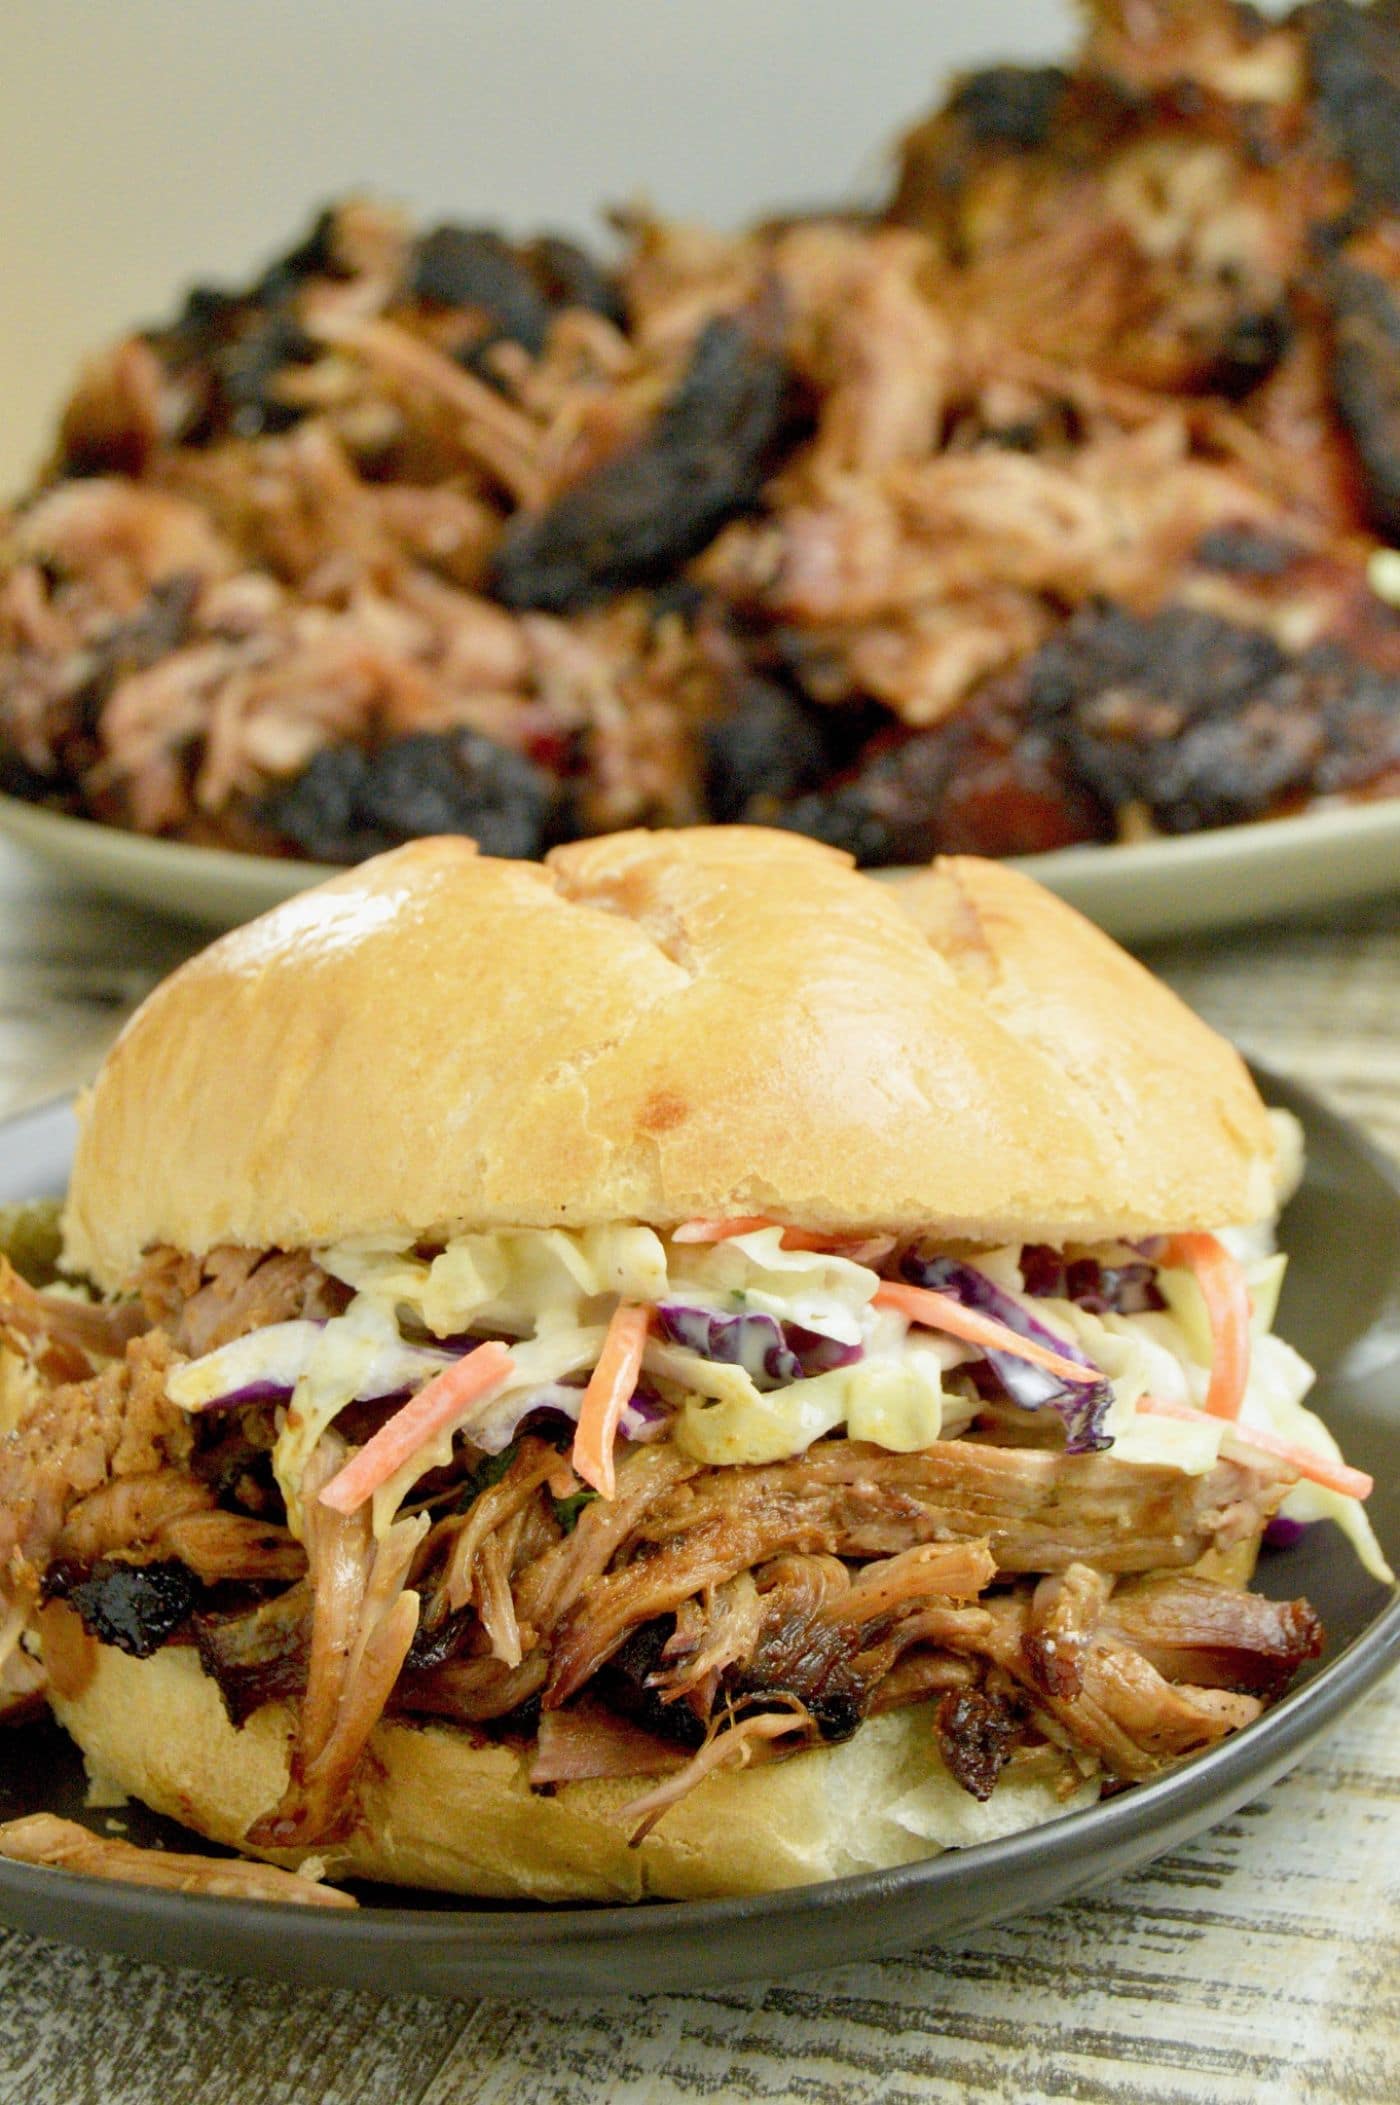 juicy pulled pork on a bun with coleslaw